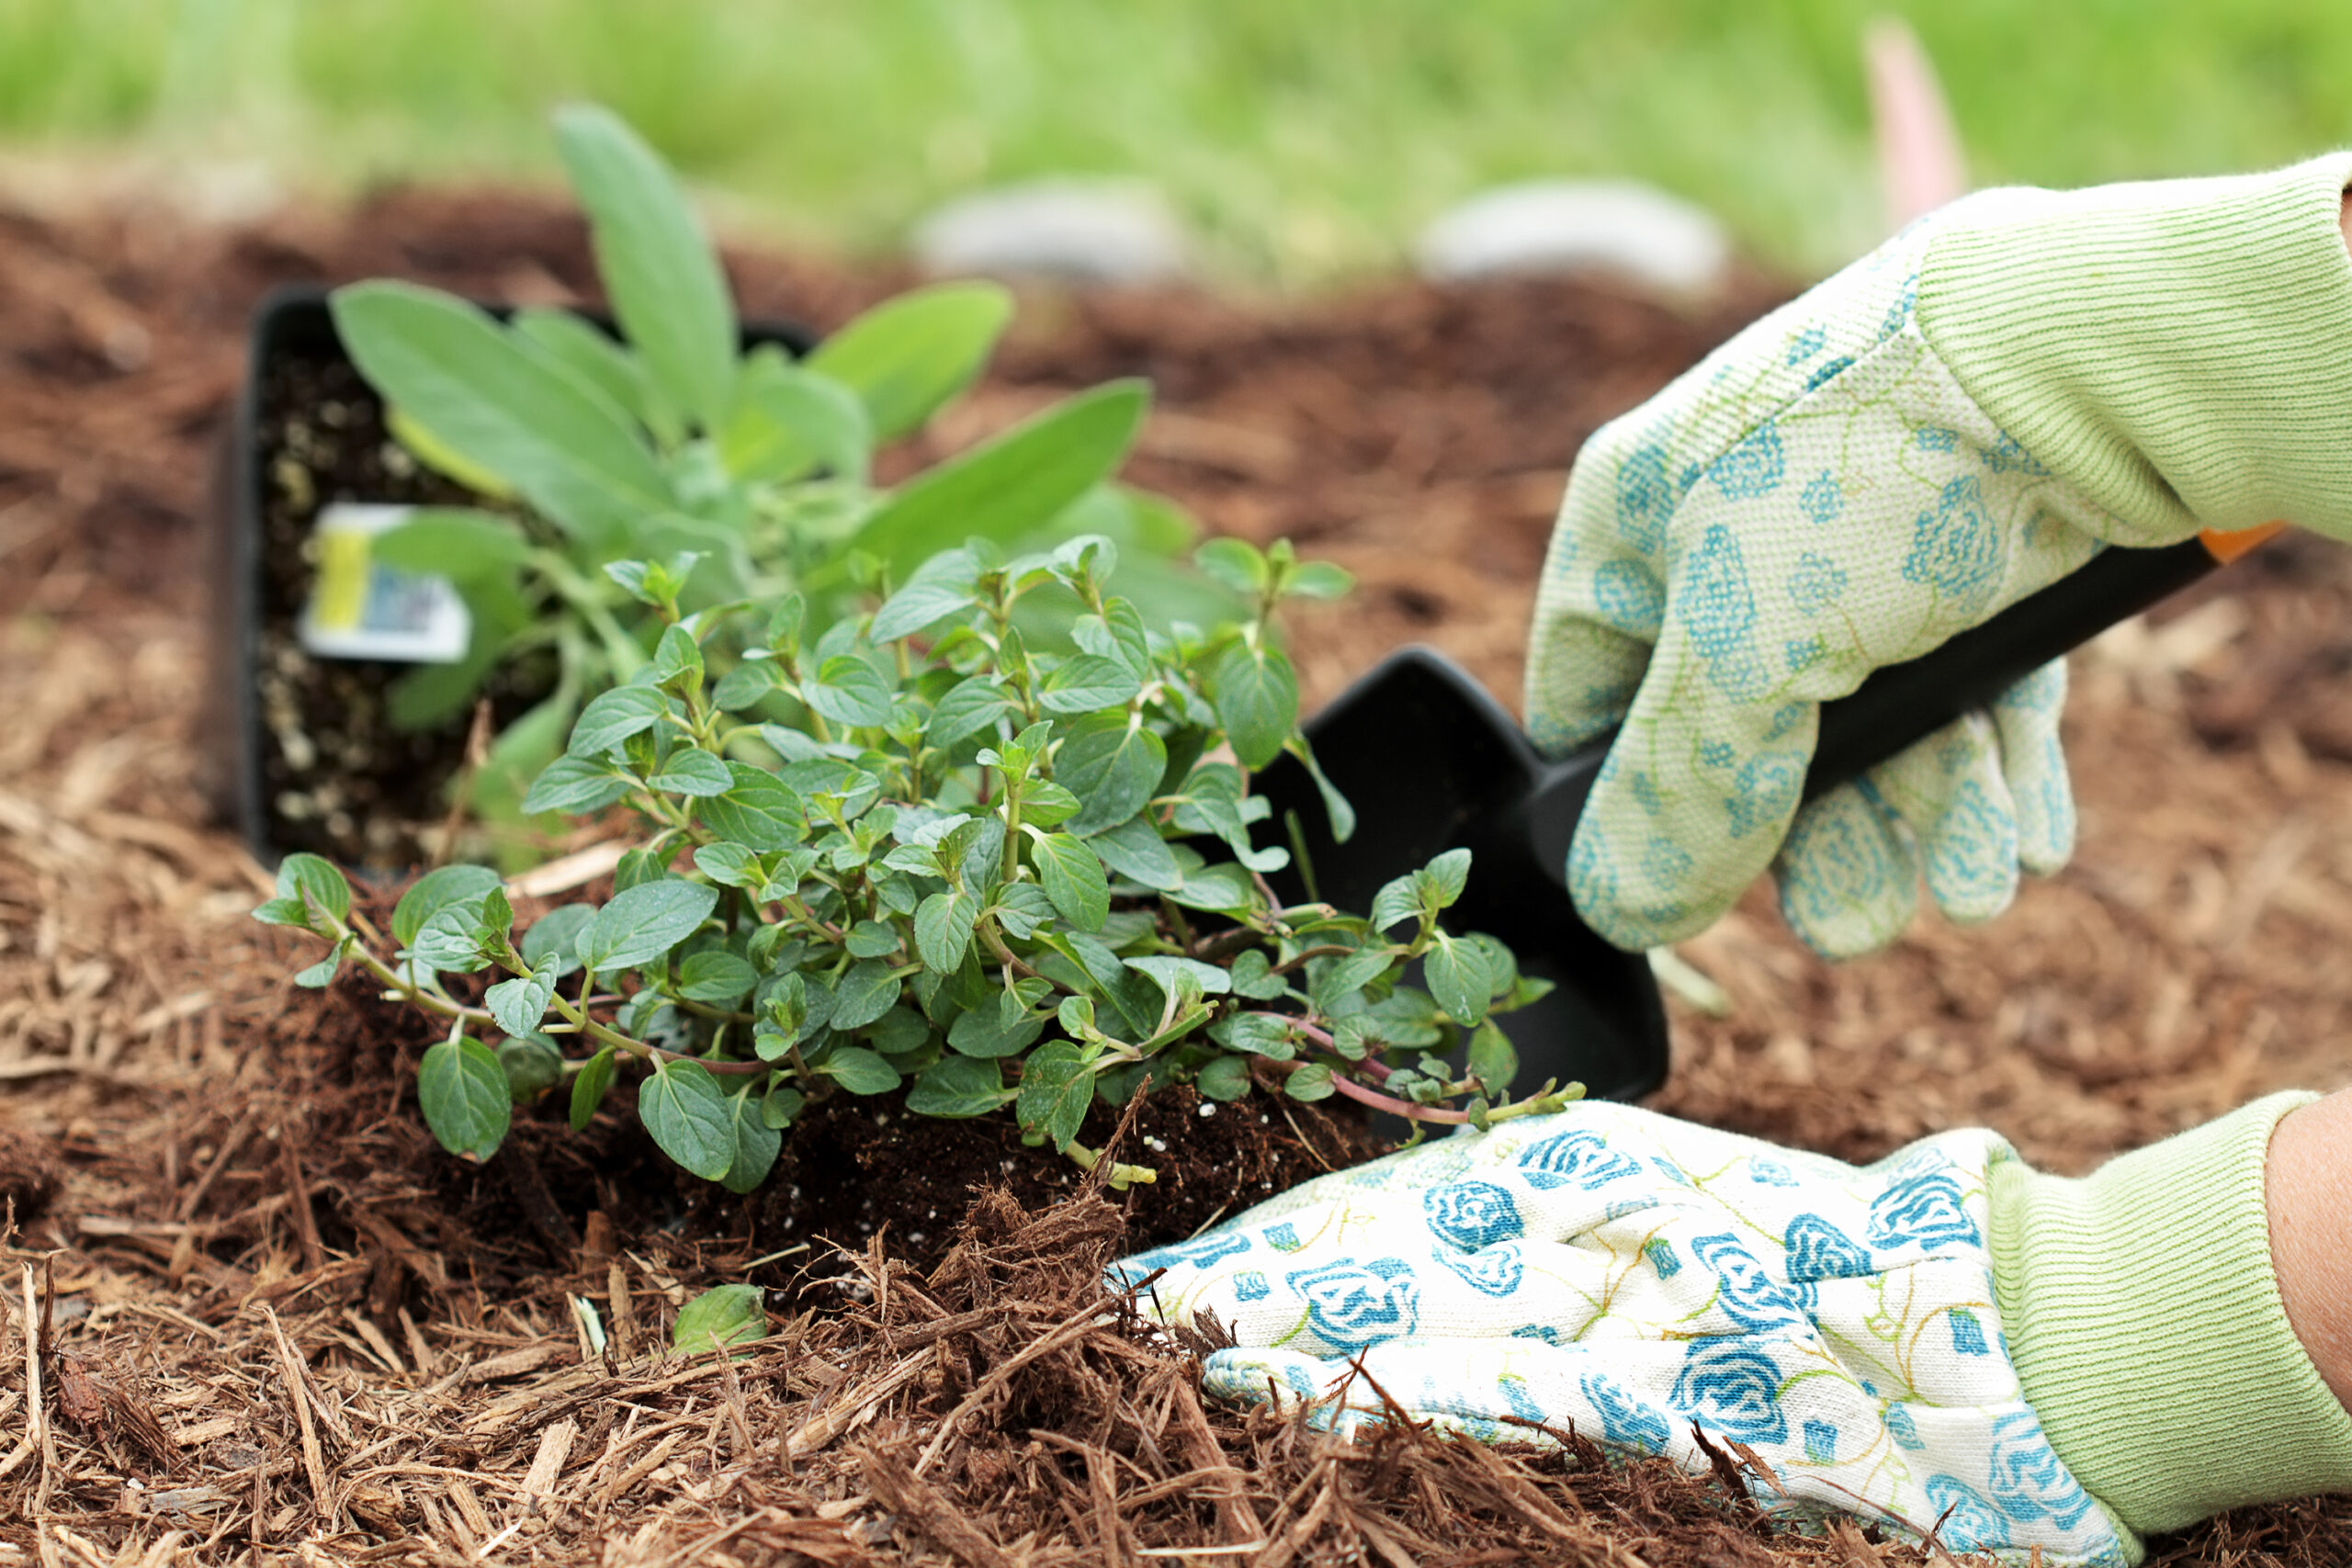 A gardener's gloved hand planting chocolate peppermint with a small trowel in a herb garden.